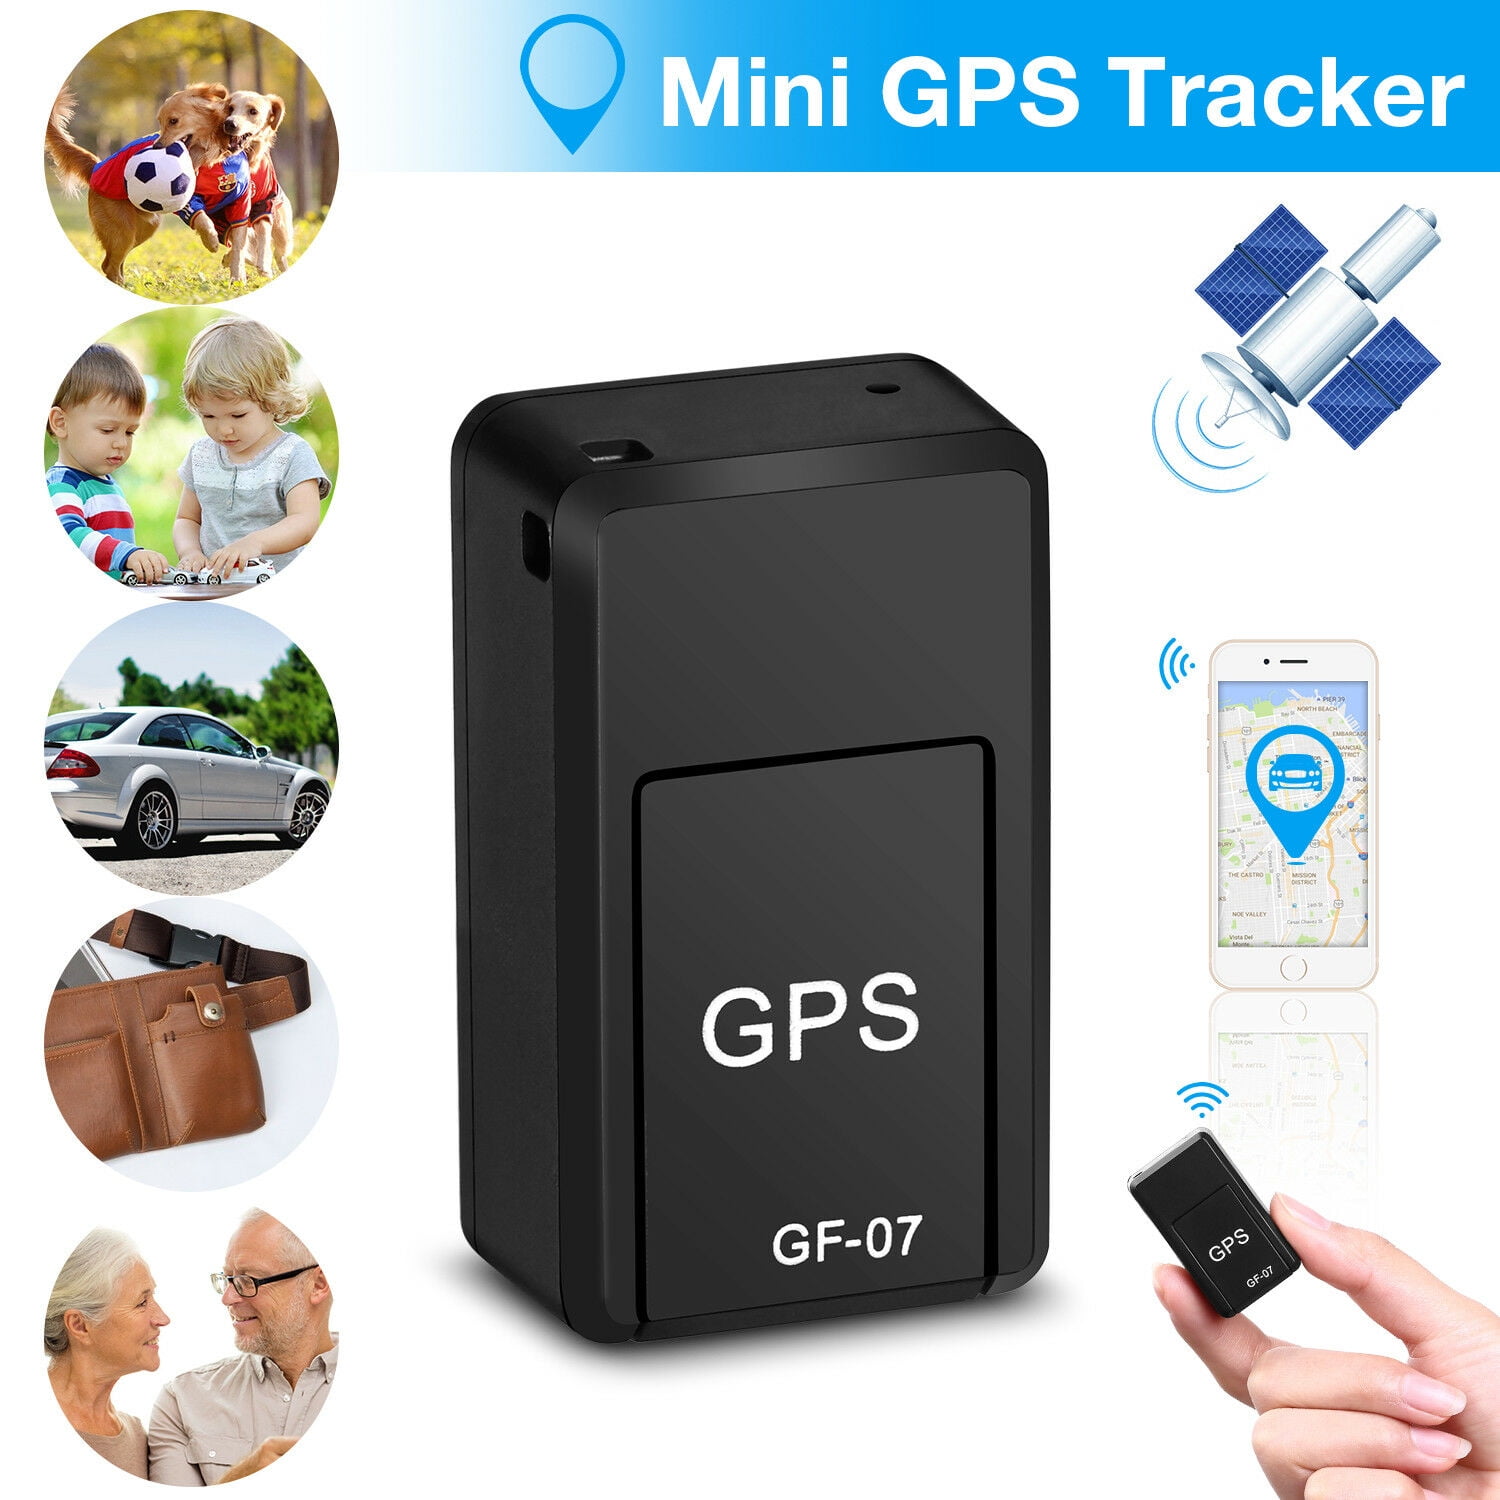 How to locate a gps tracking device on your car – Spy Gadgets